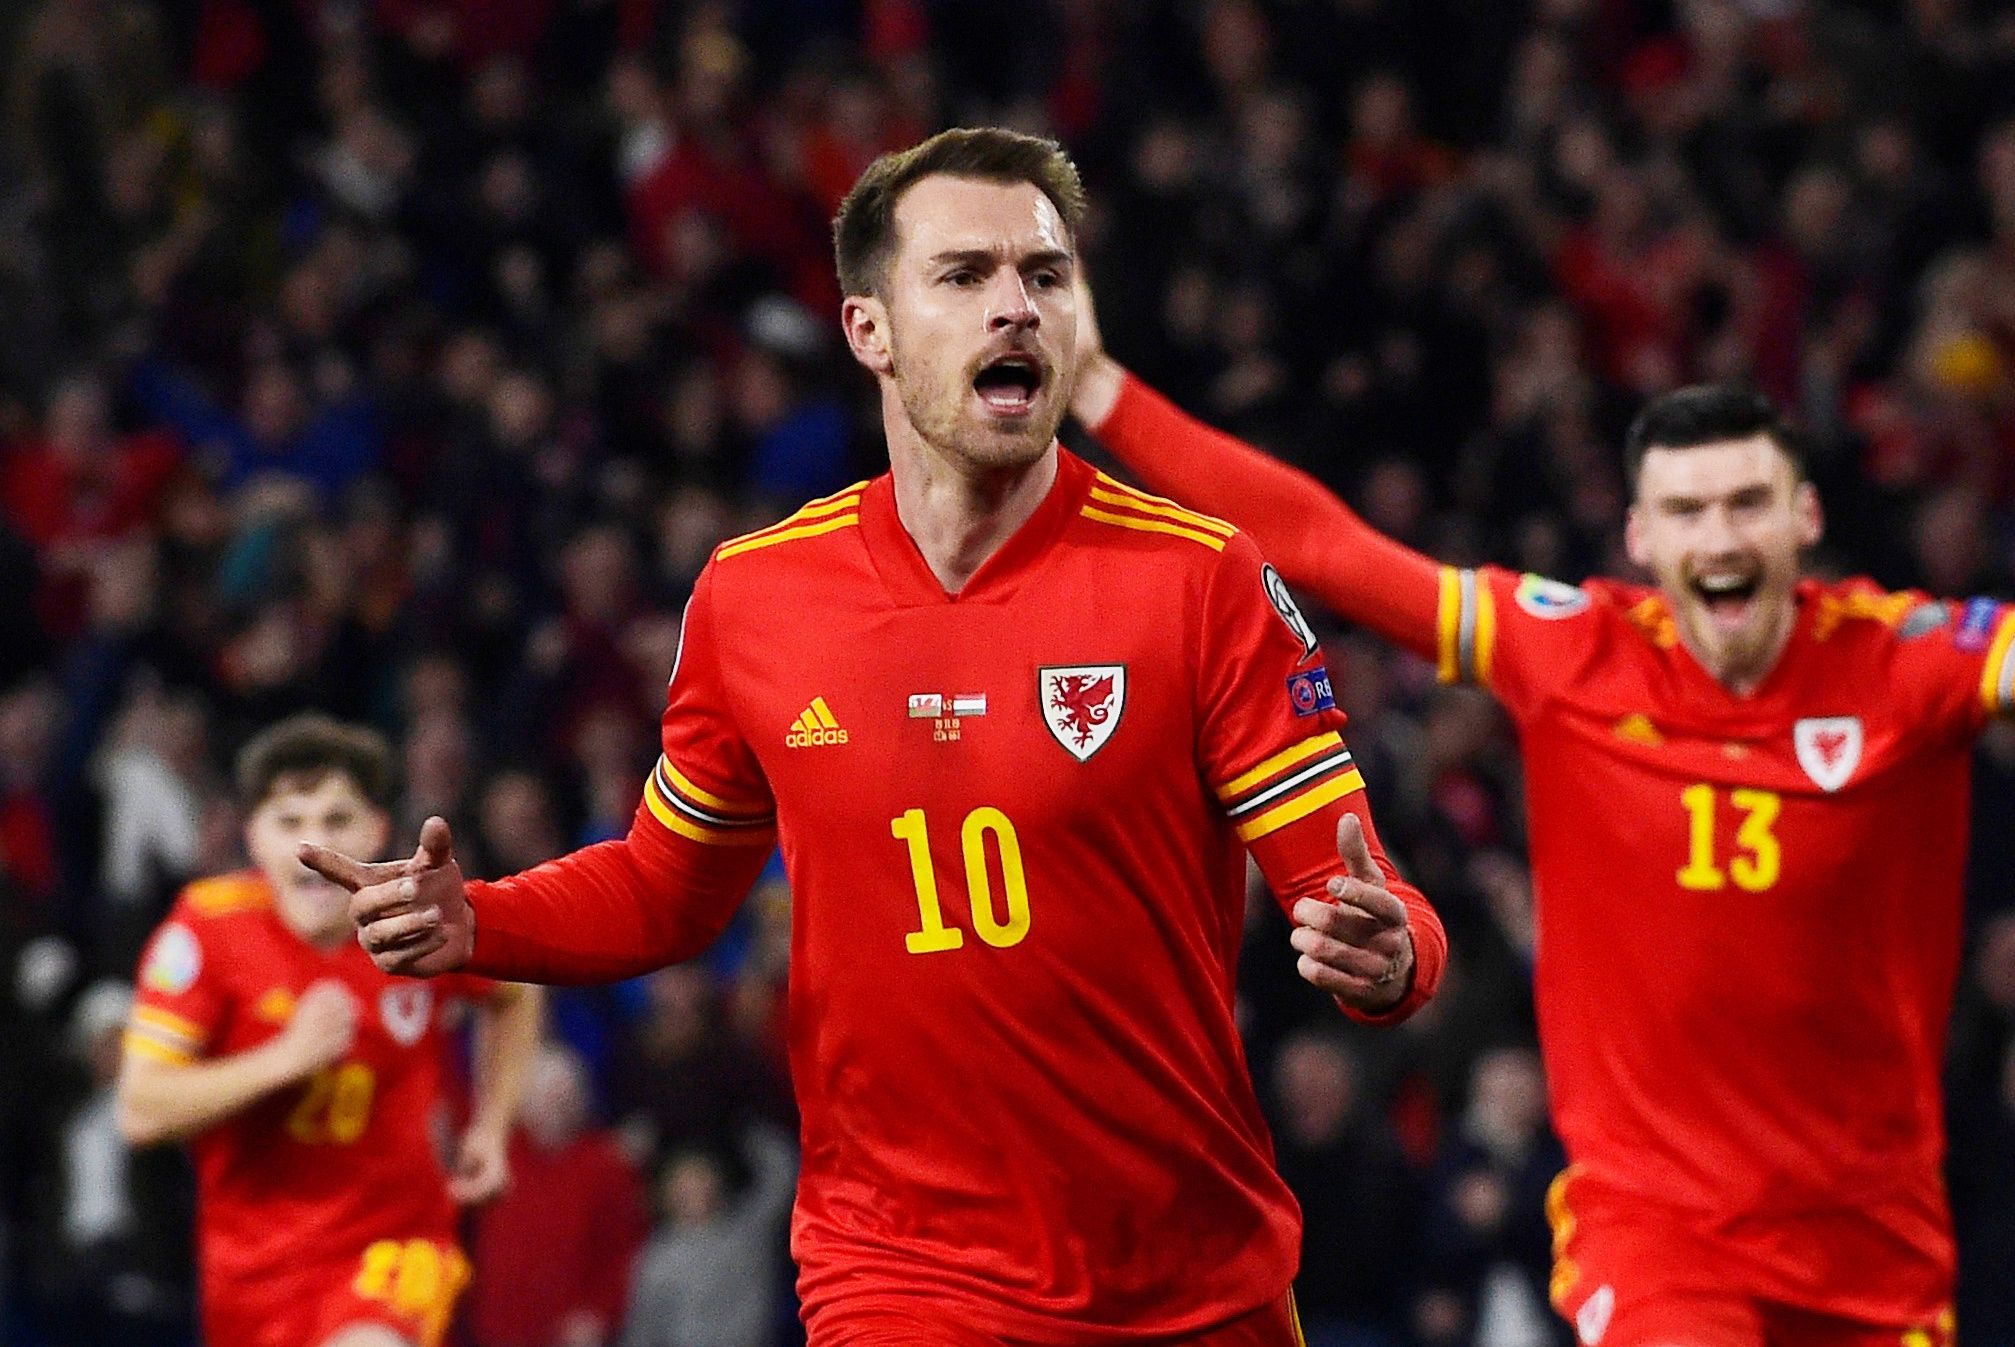 Soccer Football - Euro 2020 Qualifier - Group E - Wales v Hungary - Cardiff City Stadium, Cardiff, Wales, Britain - November 19, 2019  Wales' Aaron Ramsey celebrates scoring their first goal with Kieffer Moore   REUTERS/Rebecca Naden